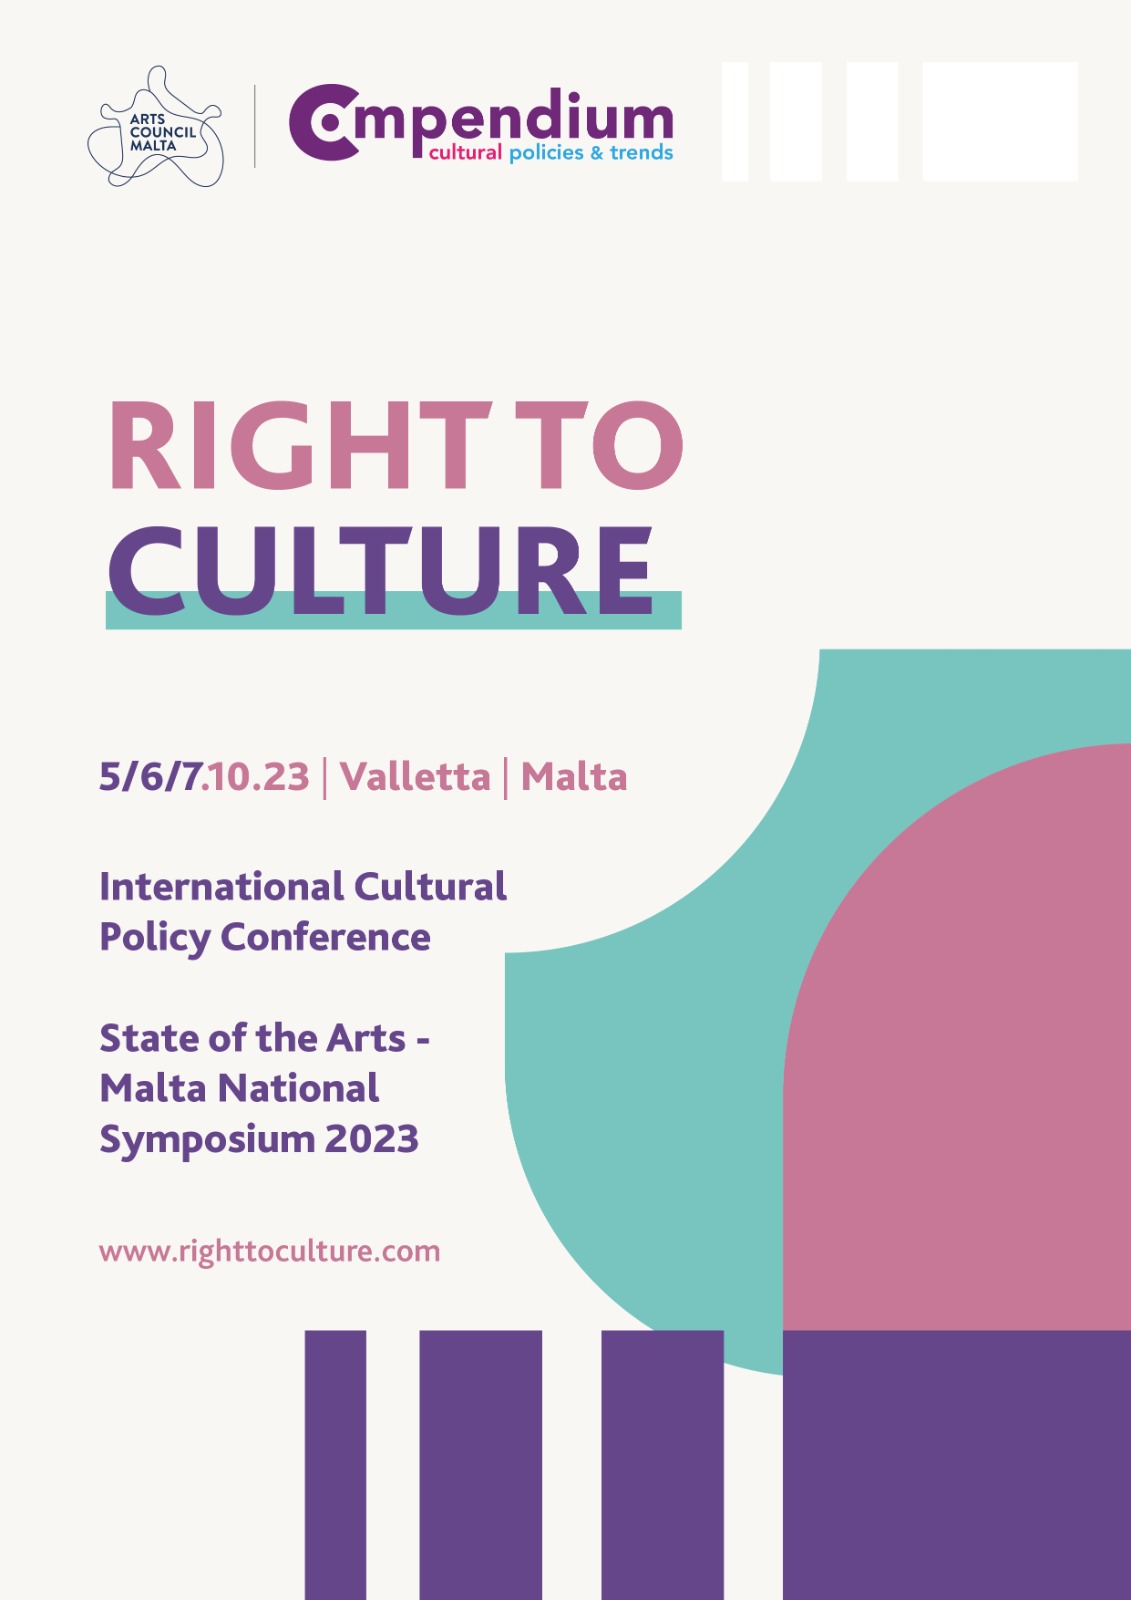 State of the Arts - Malta National Symposium 2023: “Right to Culture” poster